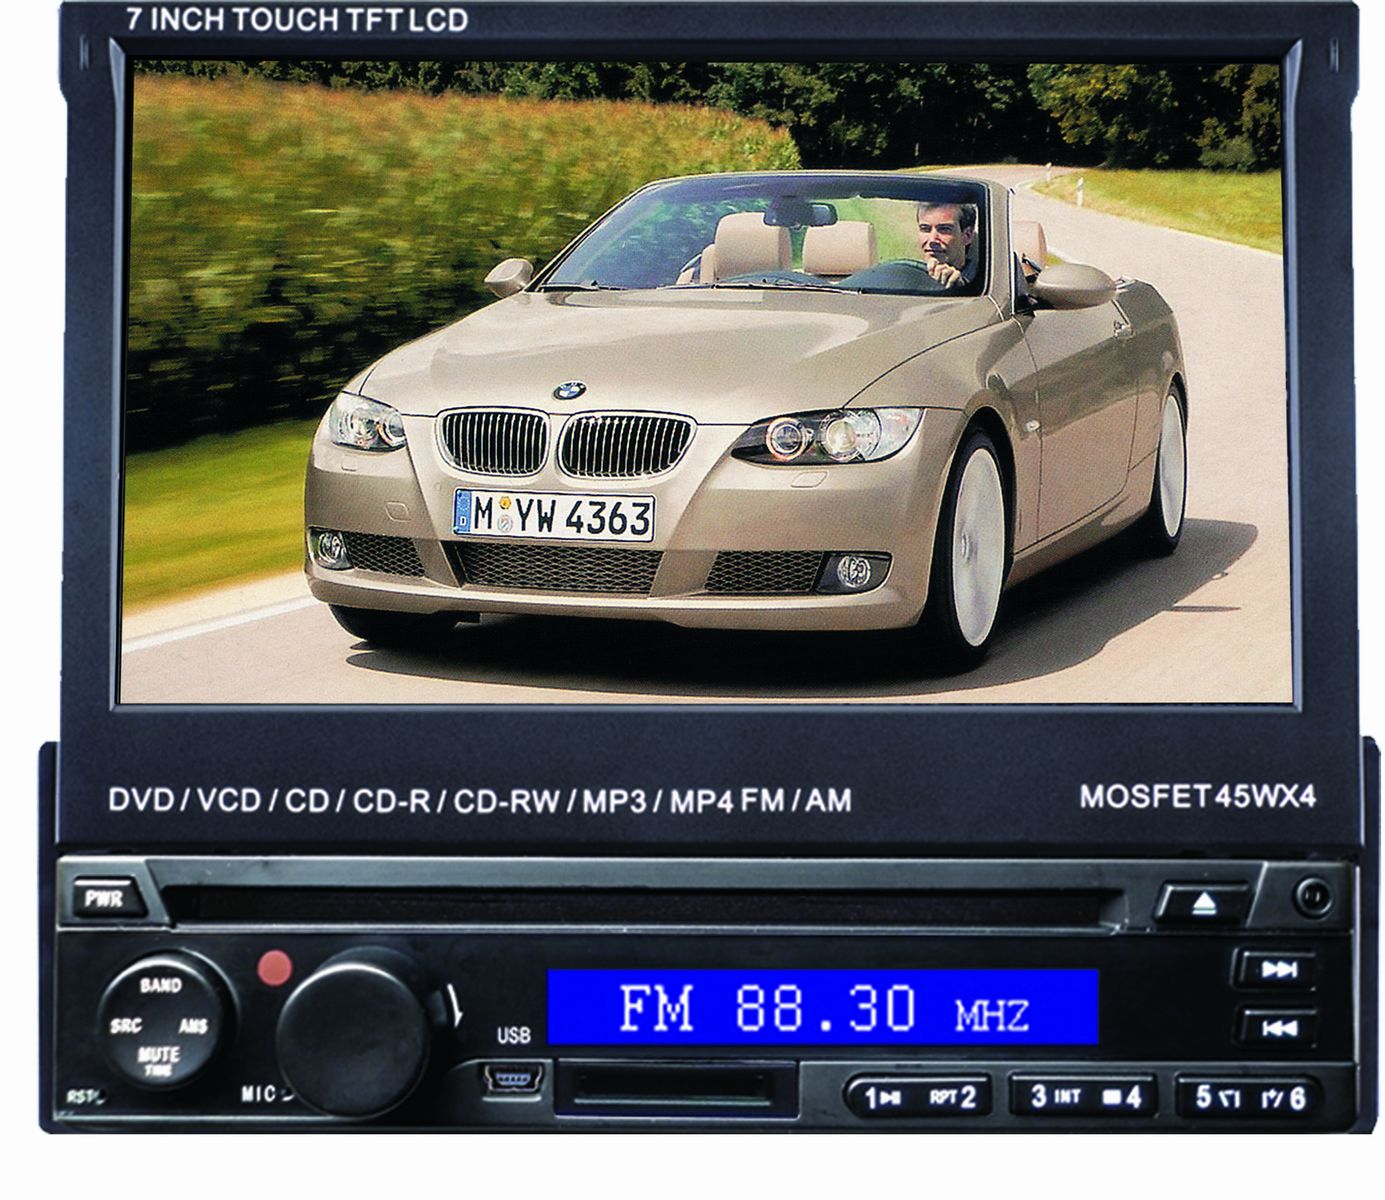 	7 inch One Din In-dash Motorized TFT-LCD Monitor/TV DVD player